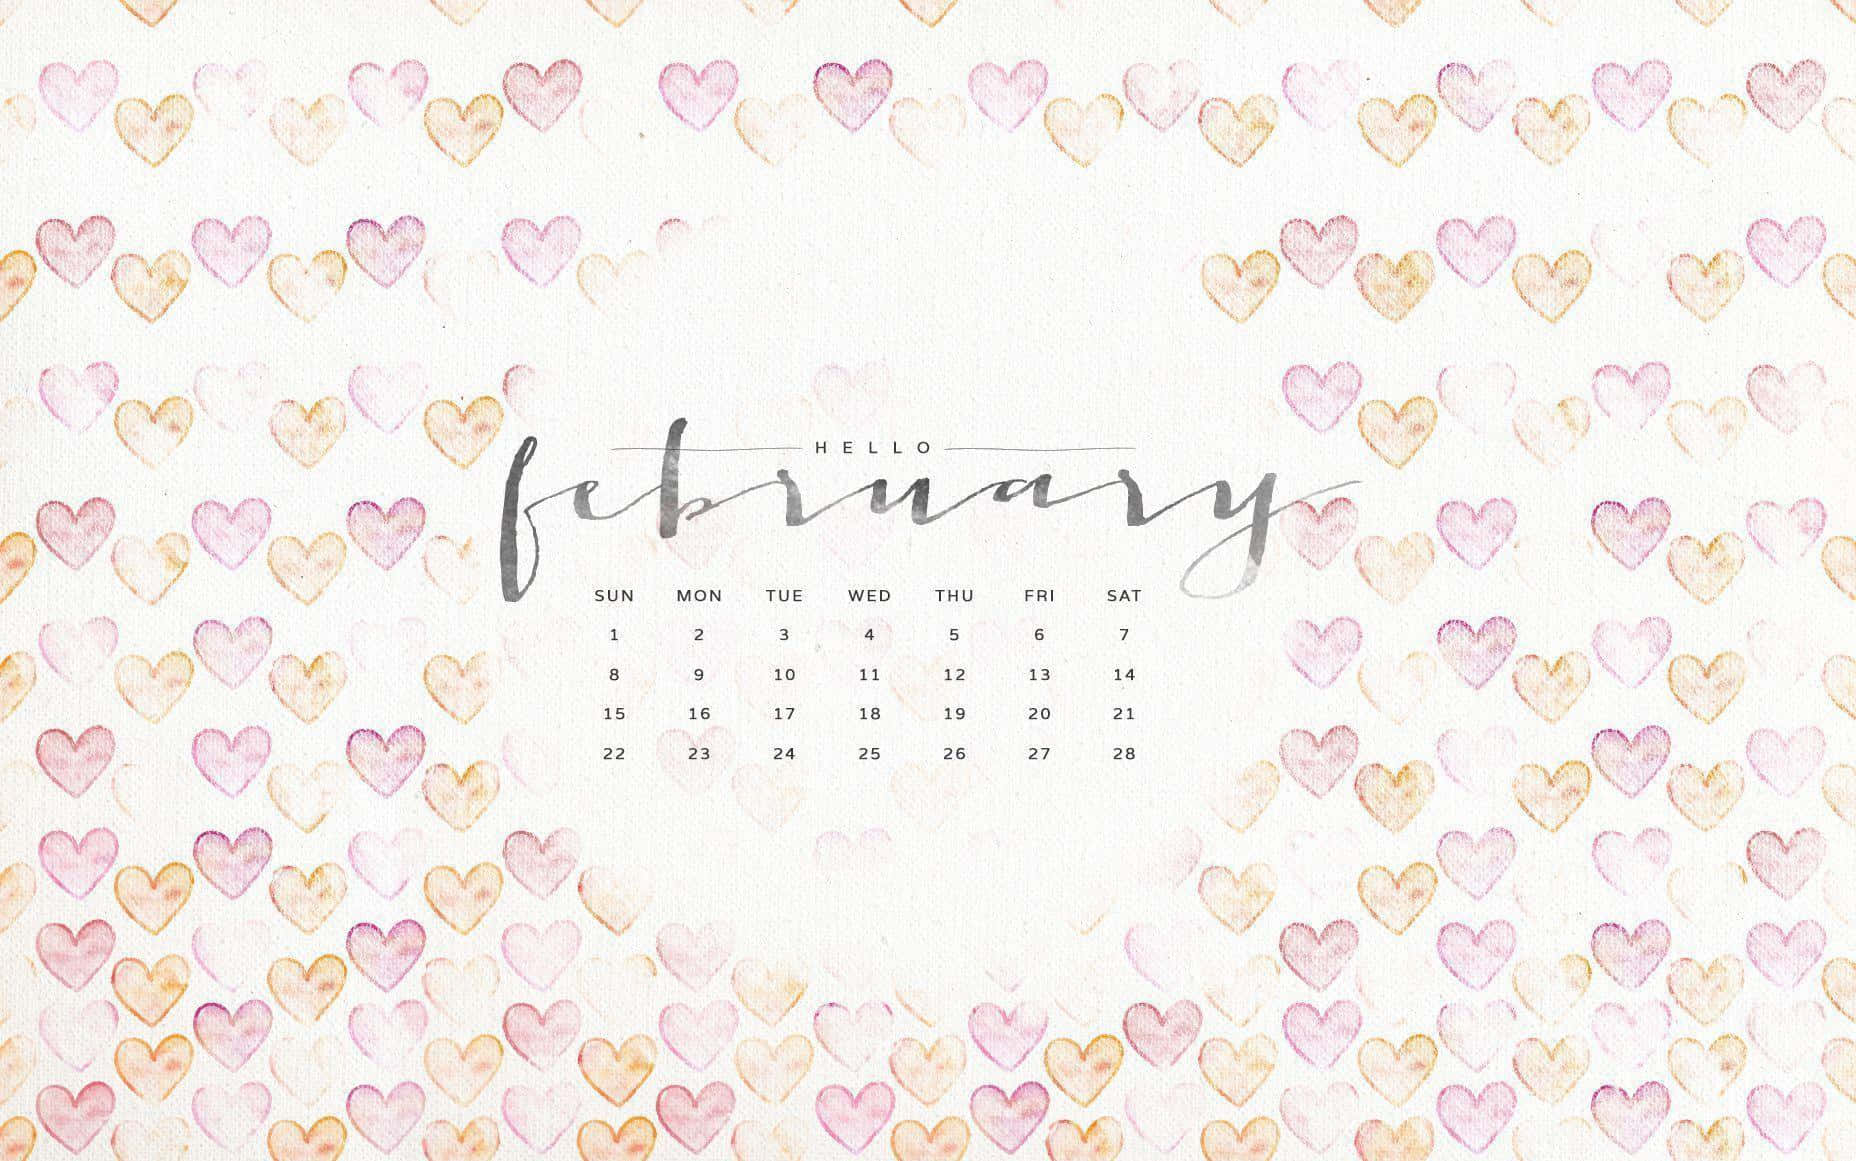 February is a month of love, celebration and joy!